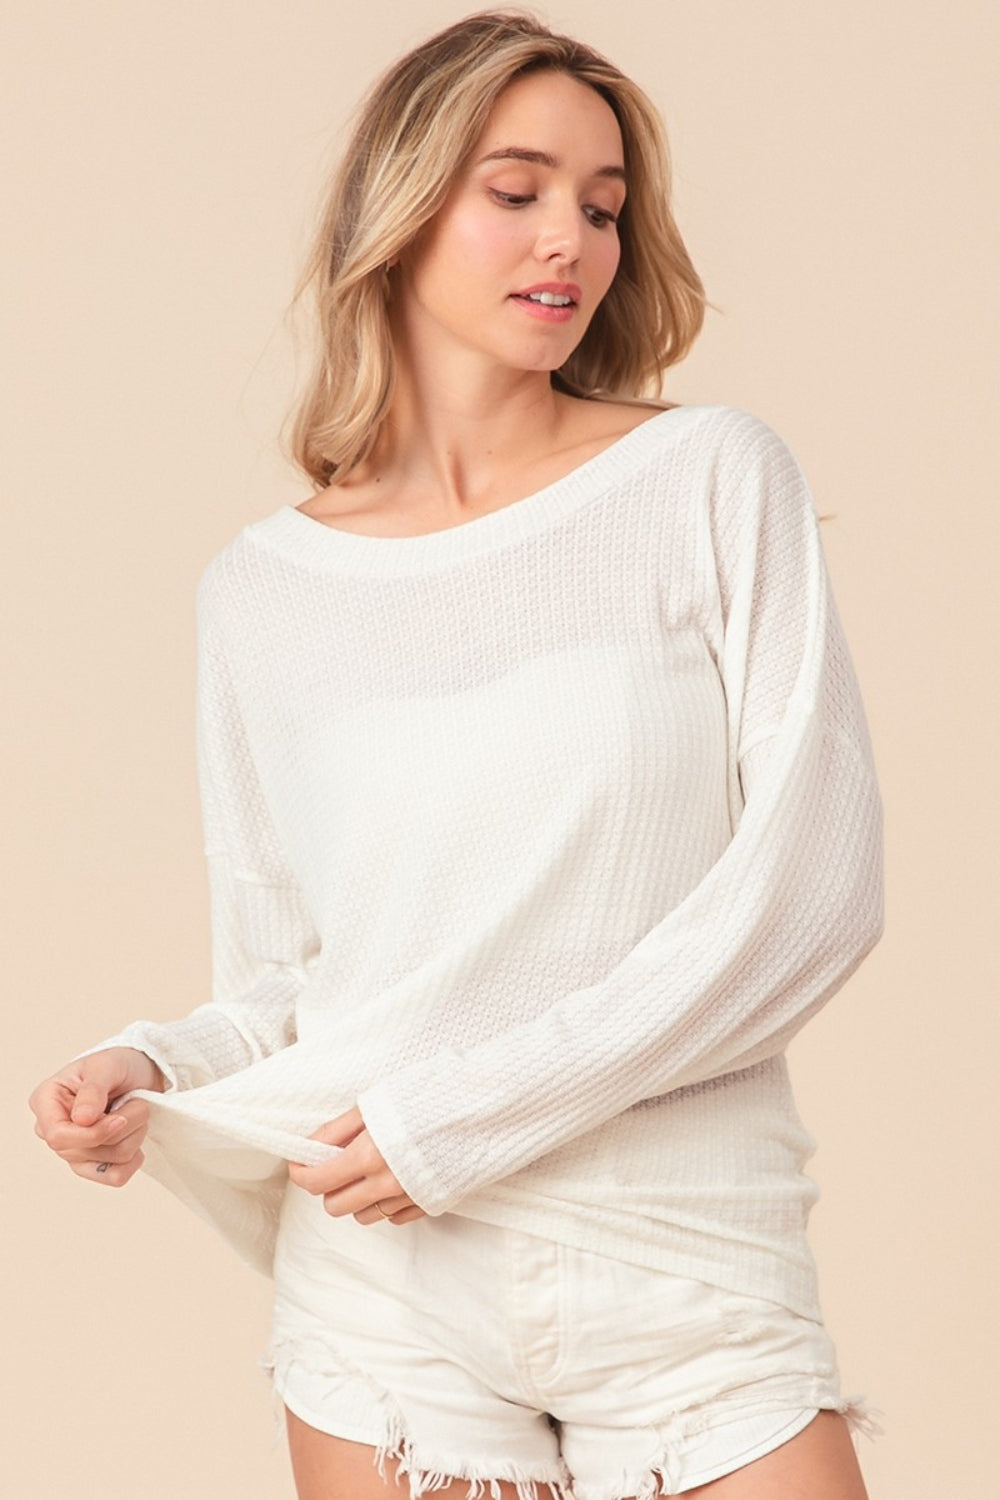 The Waffled Backless Drawstring Top is a flirty and stylish choice for your summer wardrobe. Featuring a waffled texture, this top adds depth and interest to your look. The backless design with a drawstring detail creates a playful and alluring silhouette. 